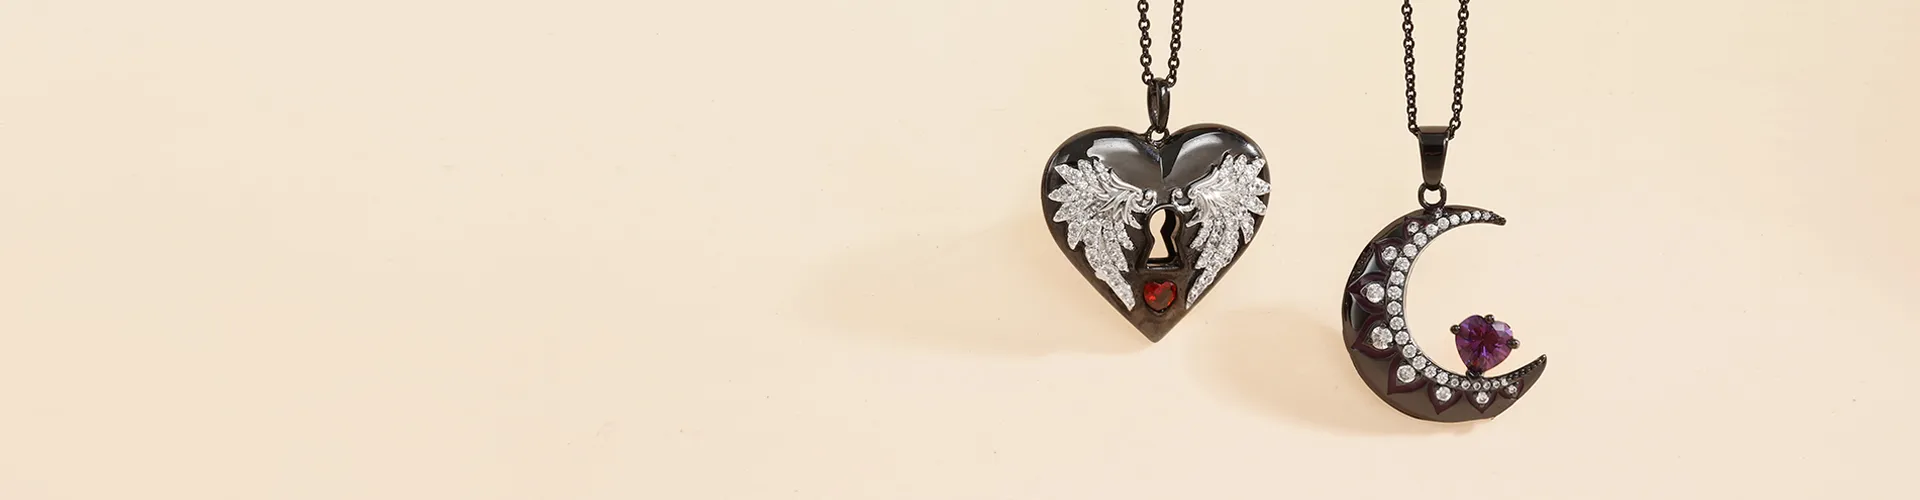 Moon Black Necklace And Heart Wing Black Necklace